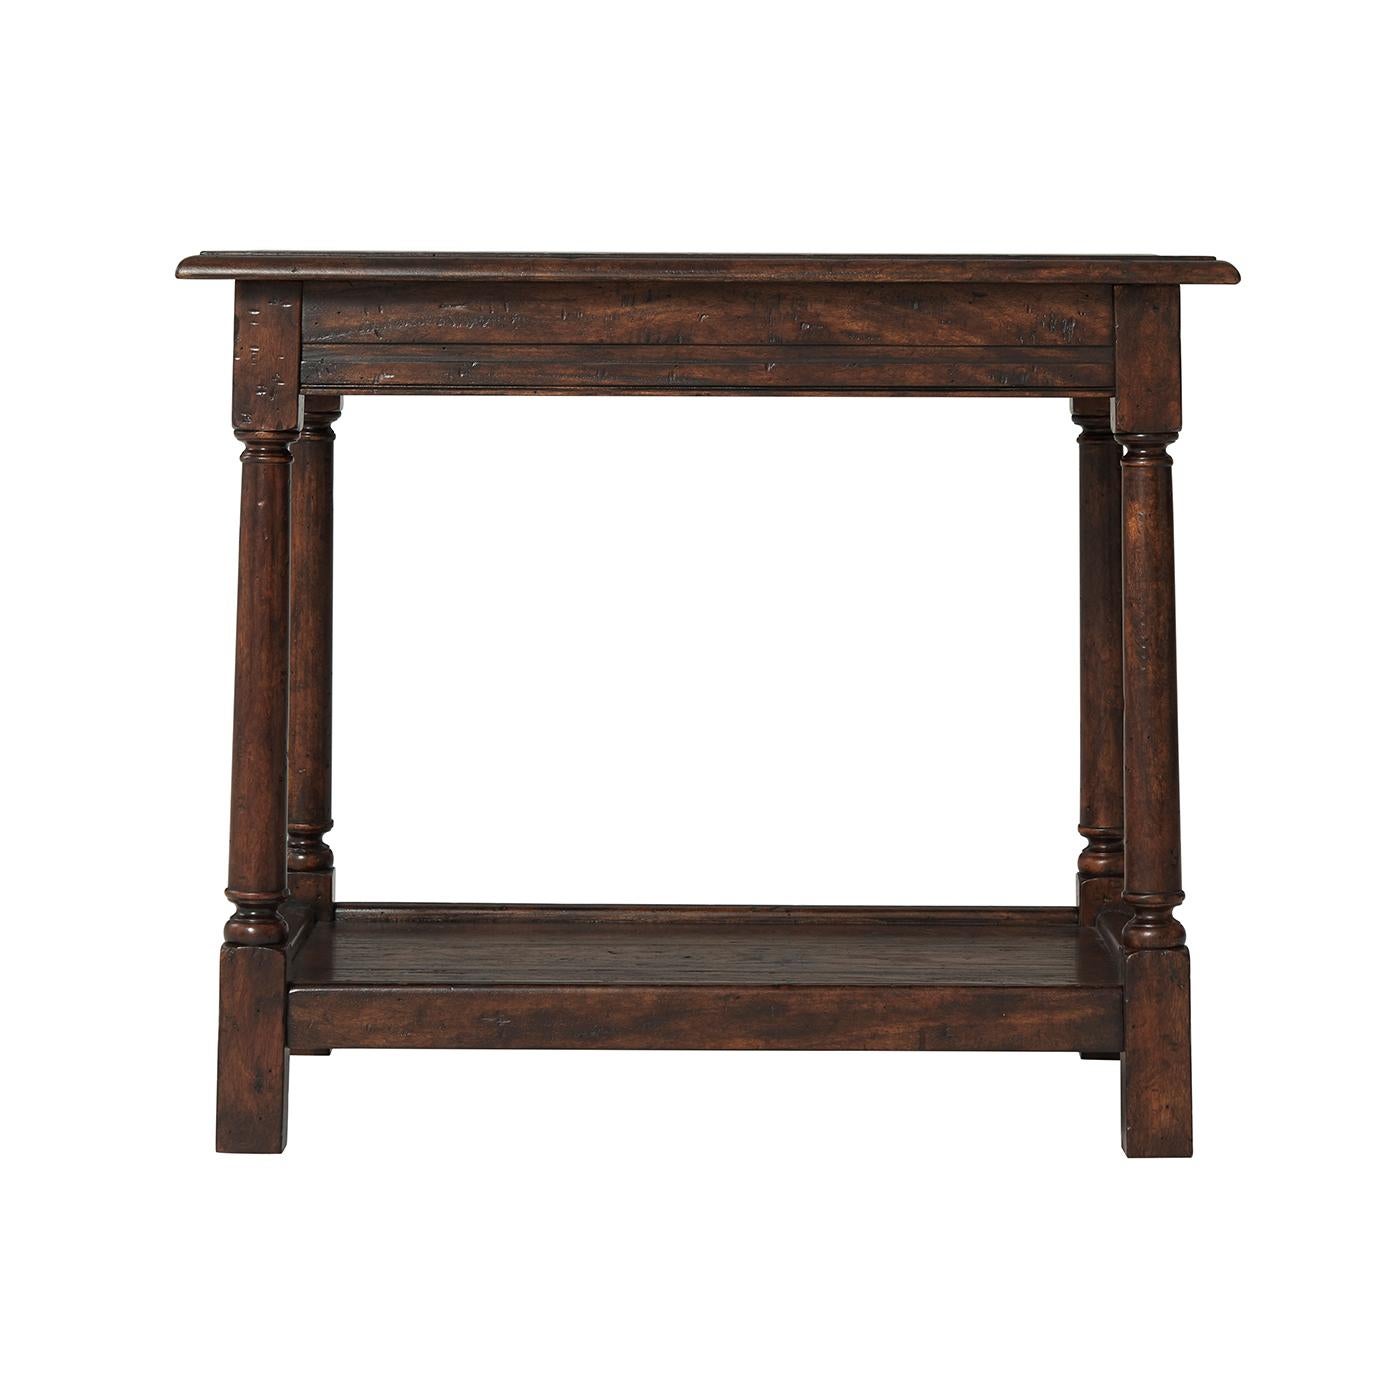 Early English mahogany and reclaimed oak occasional 'Joynt' table, the planked rectangular top with a molded edge, above a paneled frieze with gently splayed turned legs terminating in block feet joined by a planked tray under tier. Inspired by a